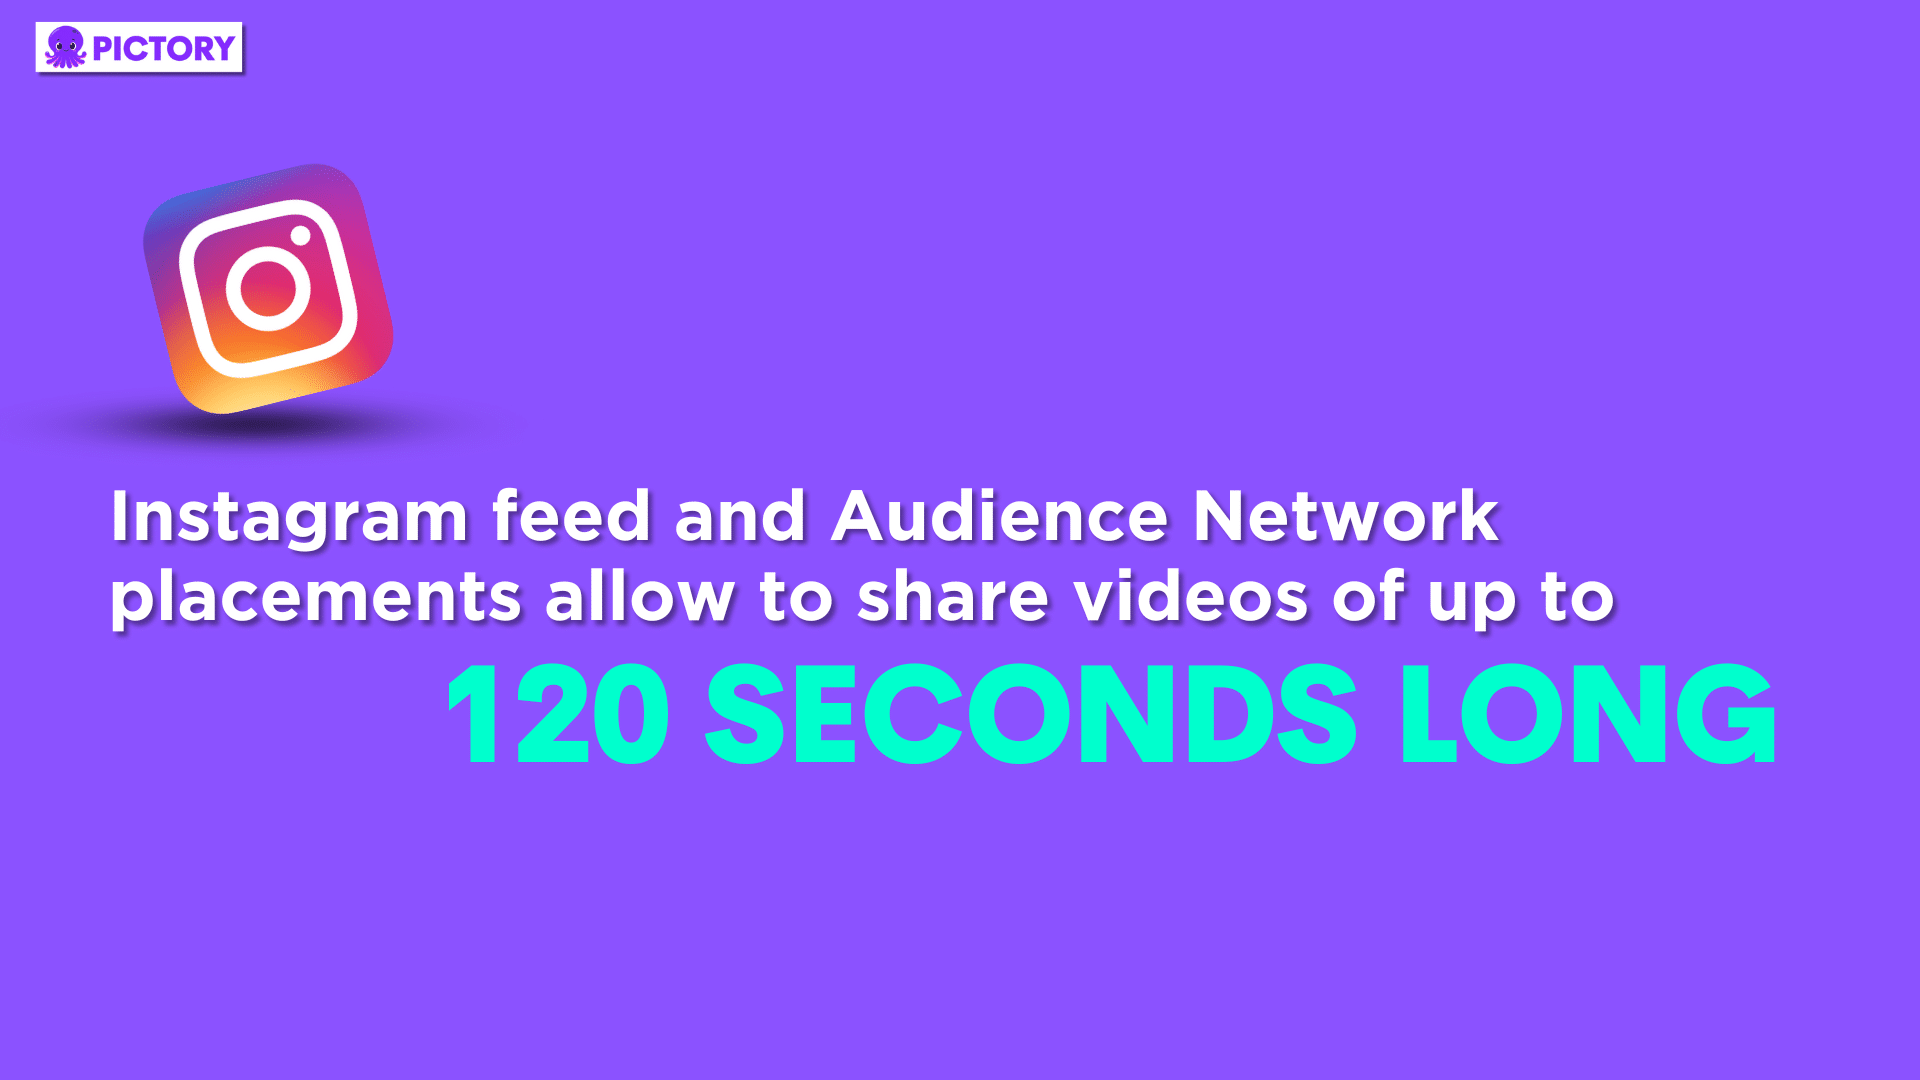 Instagram statistic, infographic, Instagram feed and Audience Network placements allow to share videos of up to 120 seconds long.